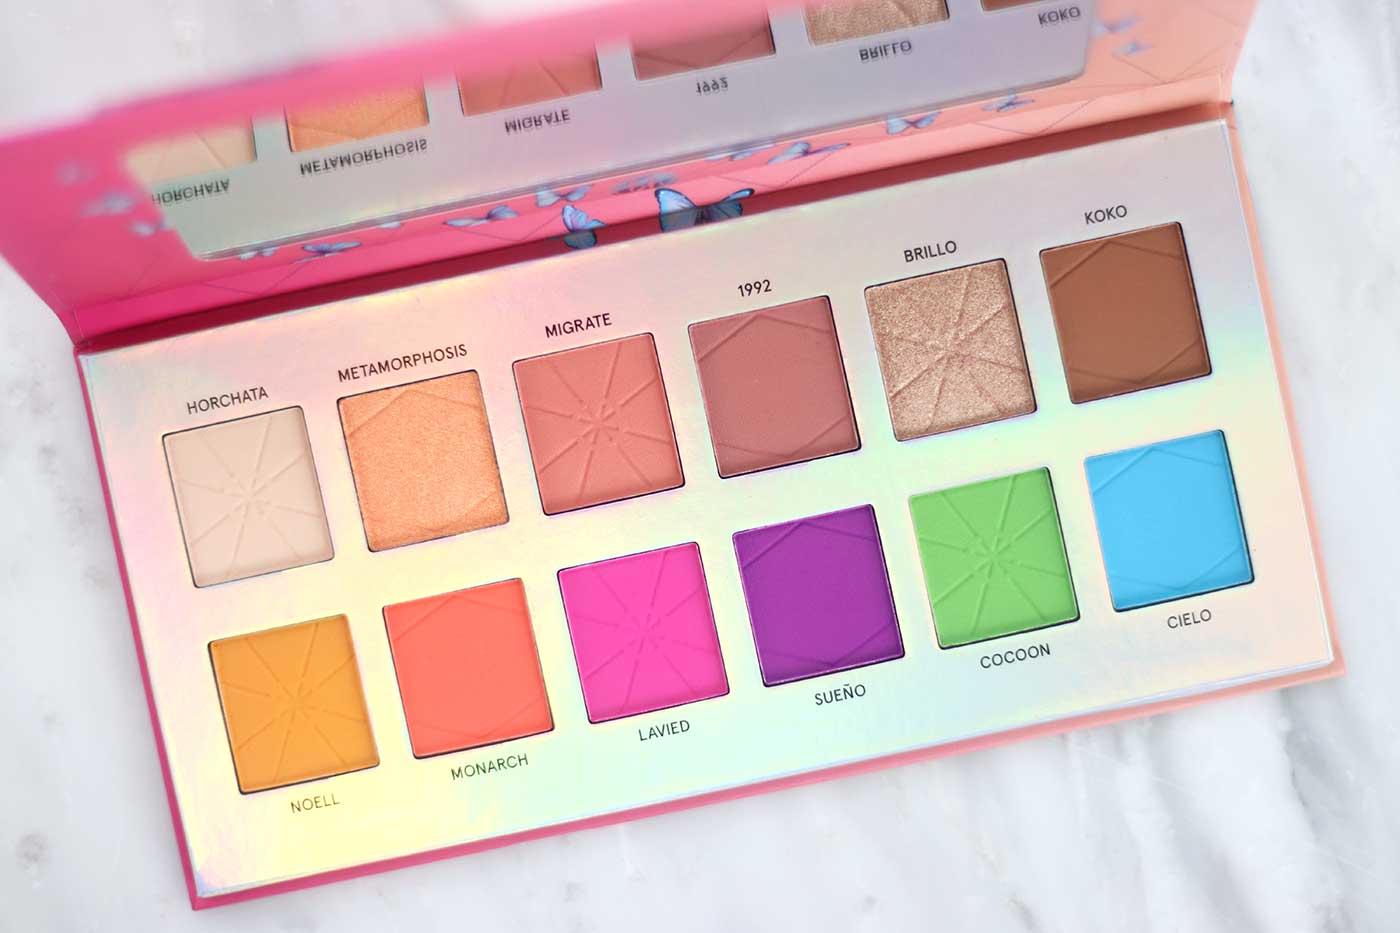 BH Cosmetics Laviedunprince Palette Review & Swatches | Slashed Beauty